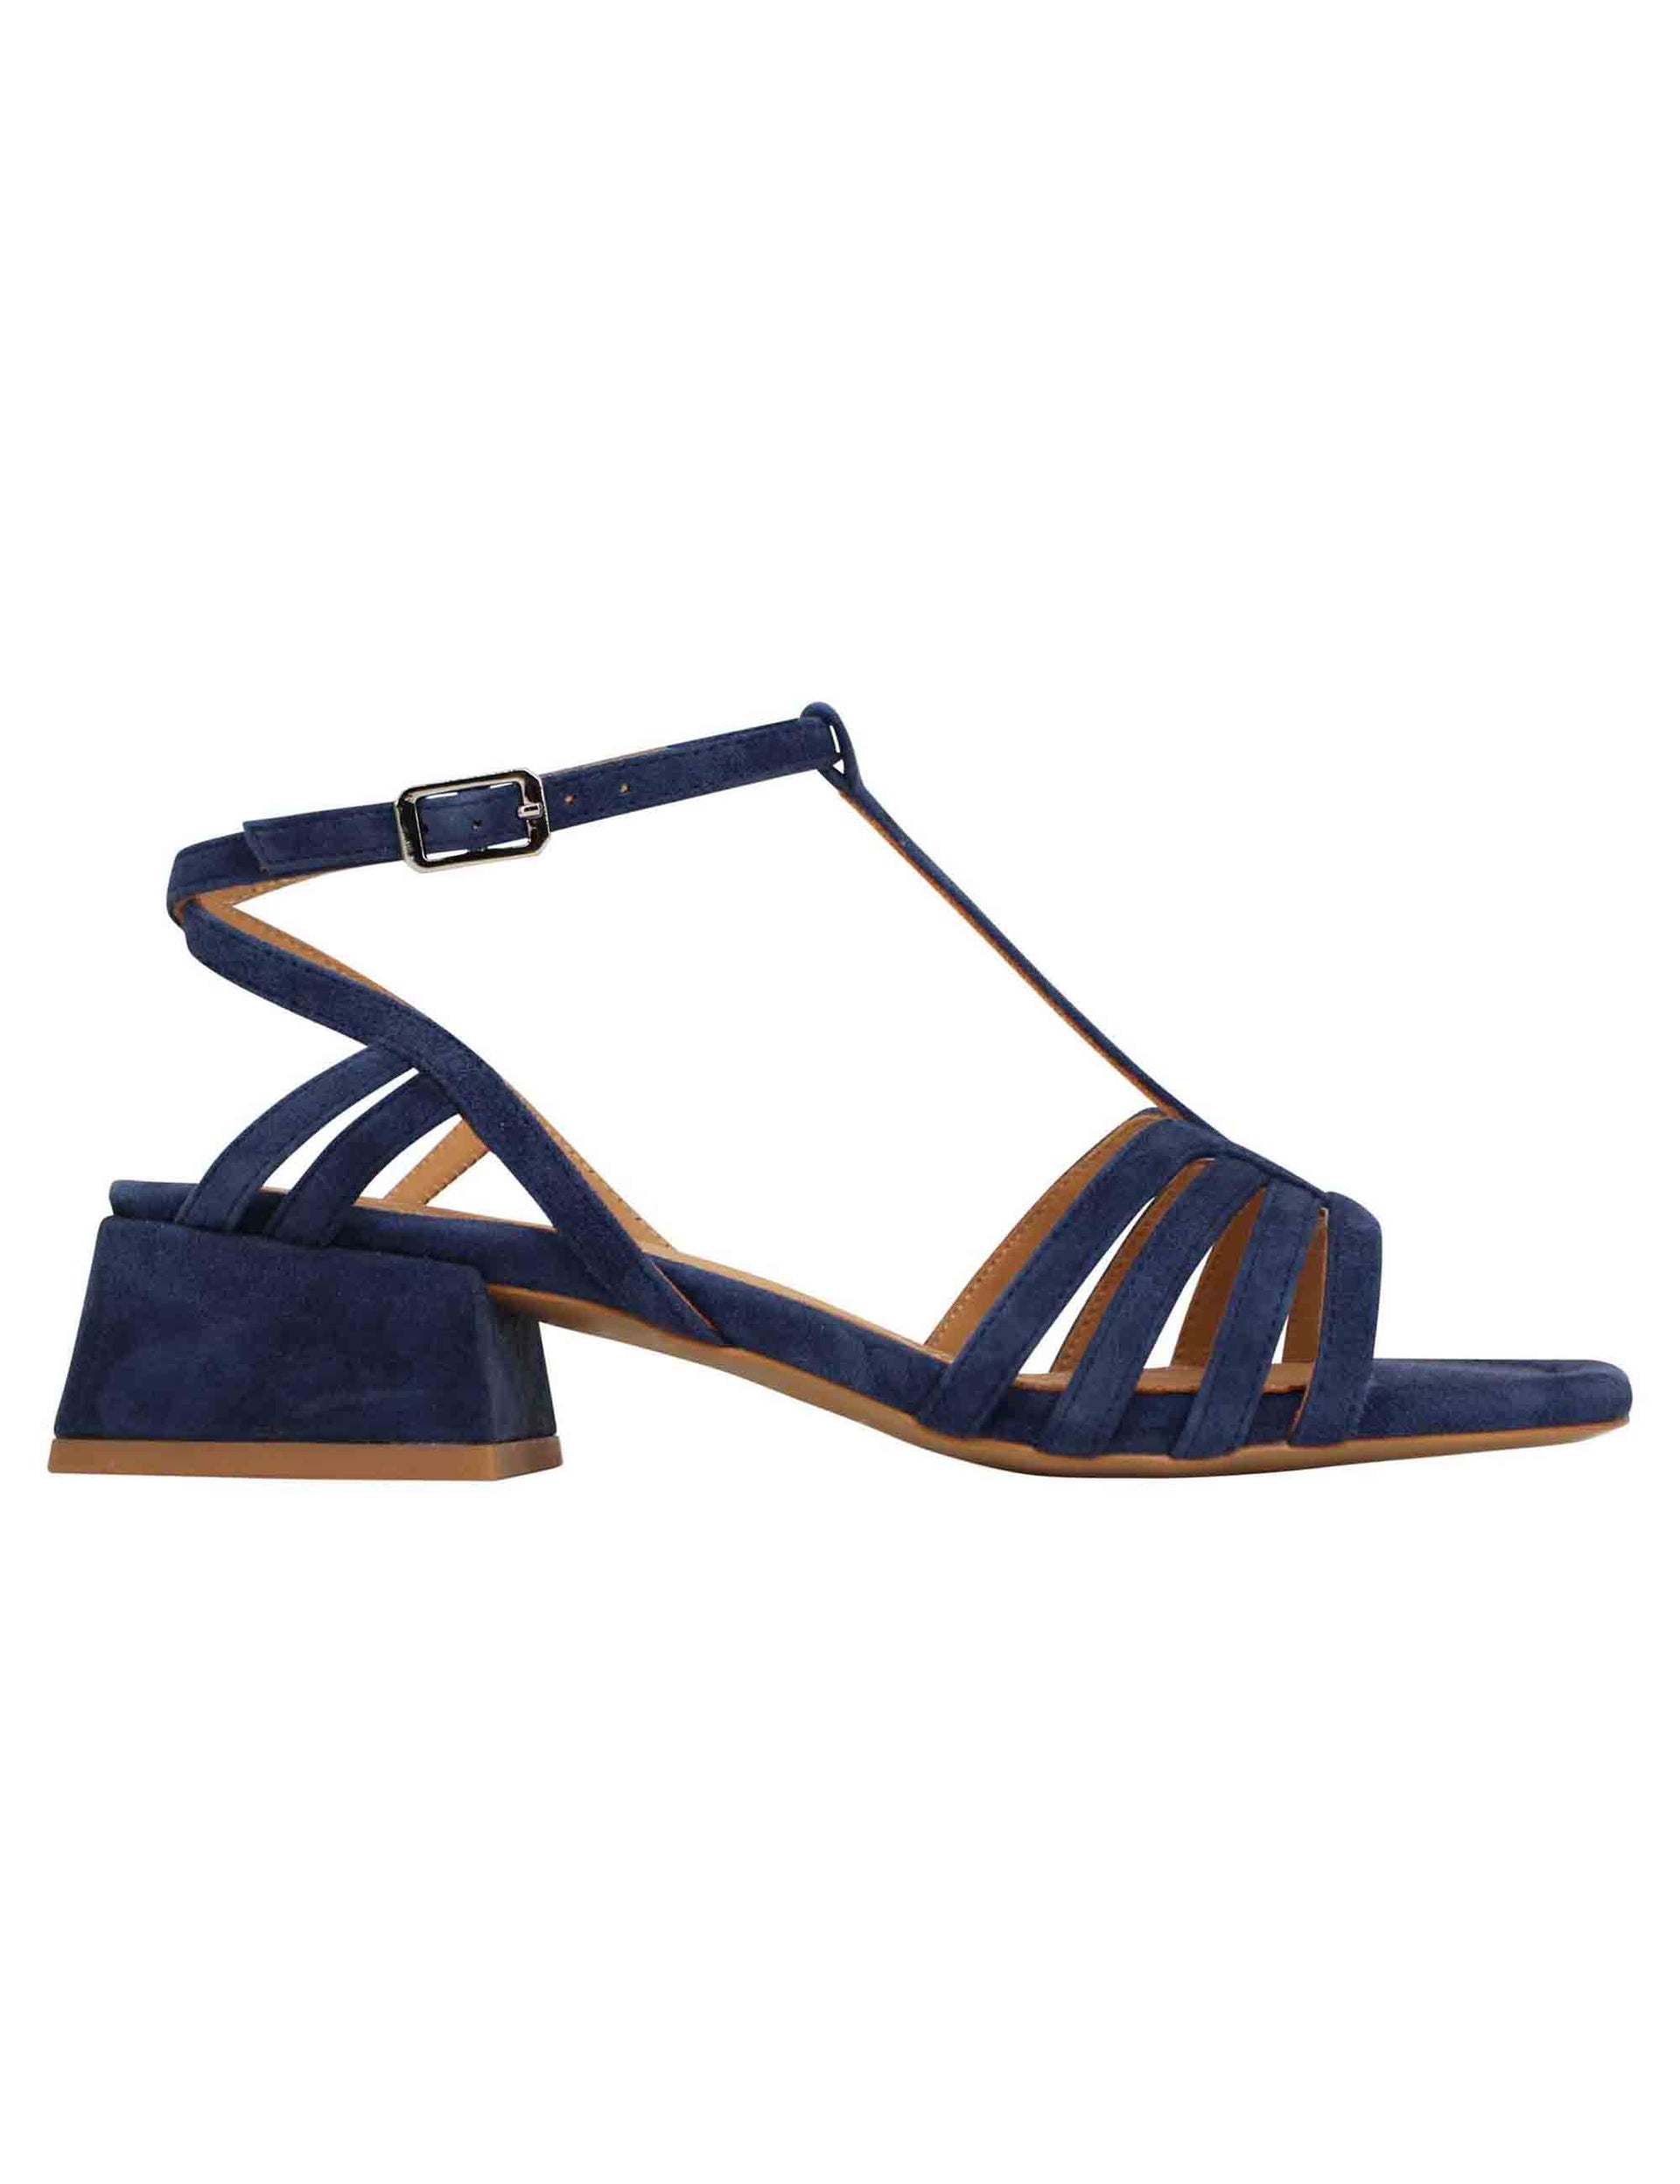 Women's sandals in blue suede leather with low heel and ankle strap